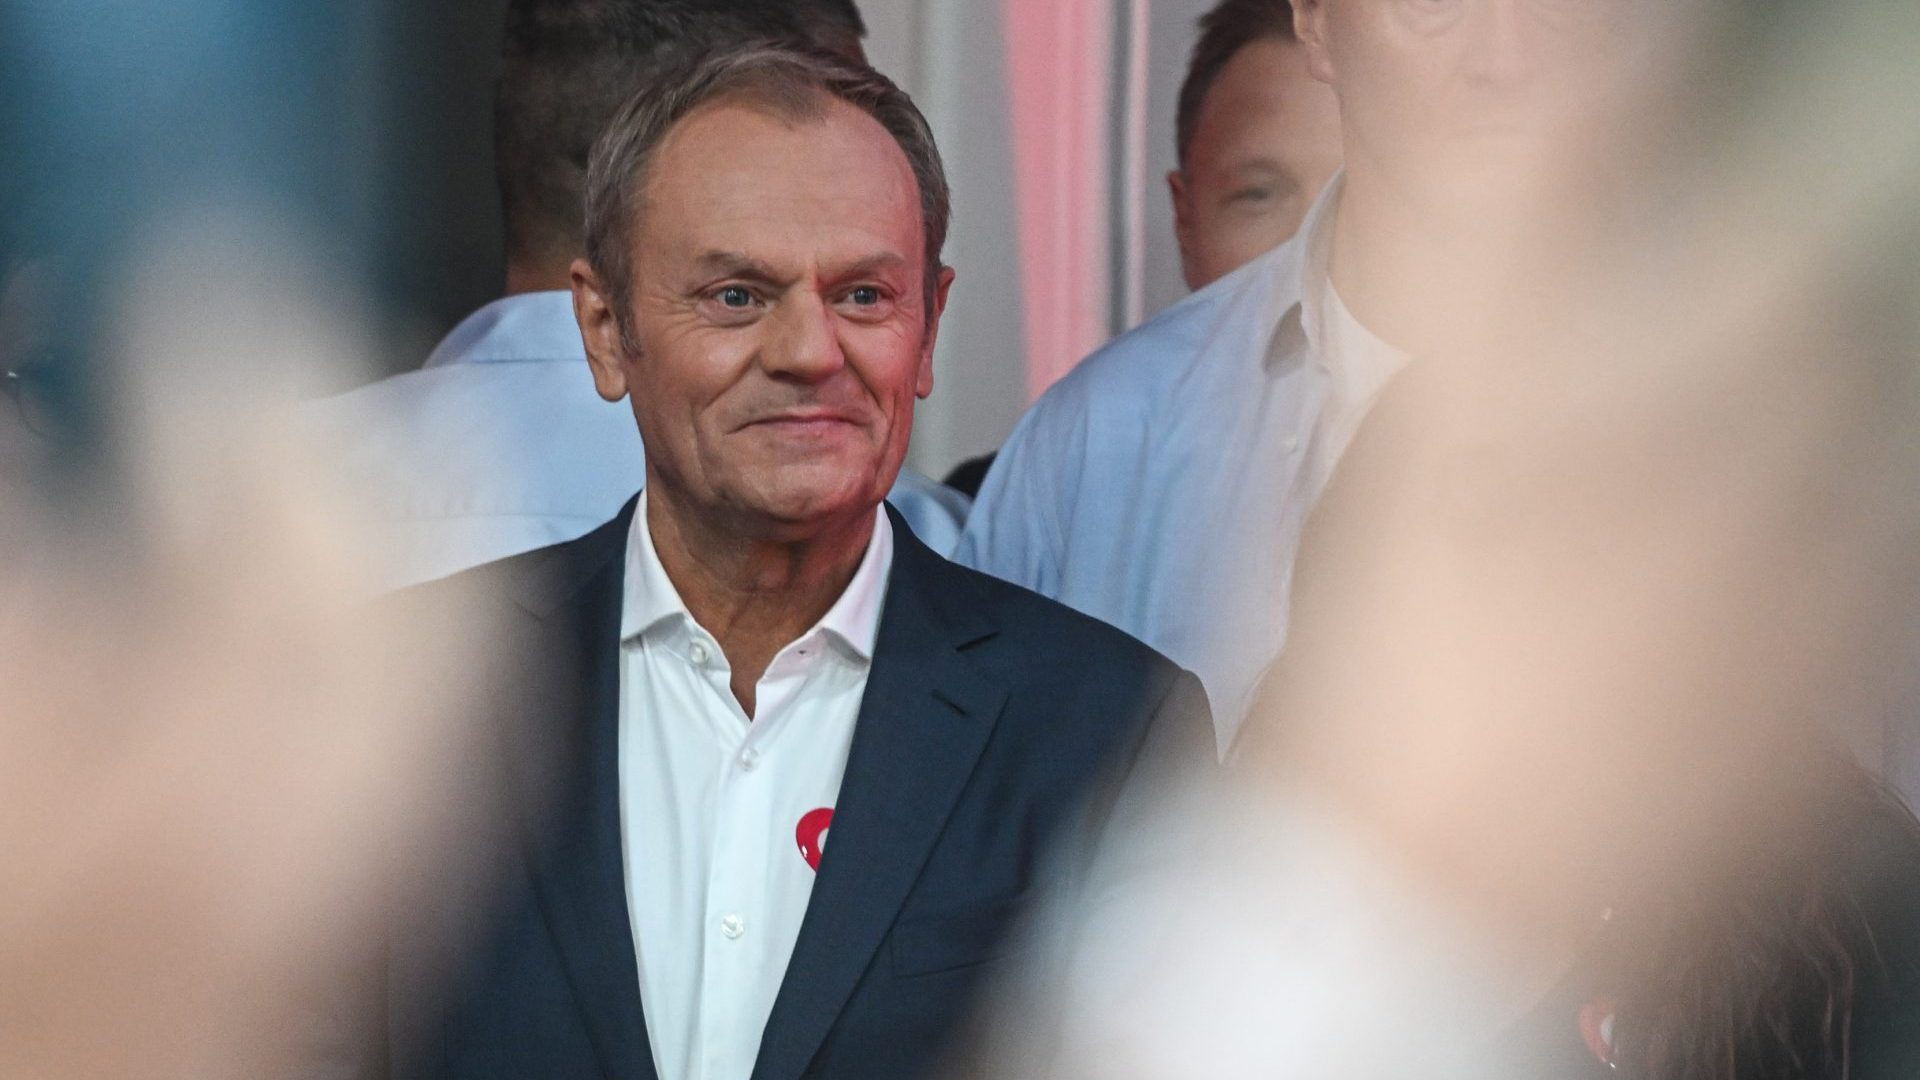 The leader of Civic Coalition (KO), Donald Tusk celebrates the exit poll results (Photo by Omar Marques/Getty Images)